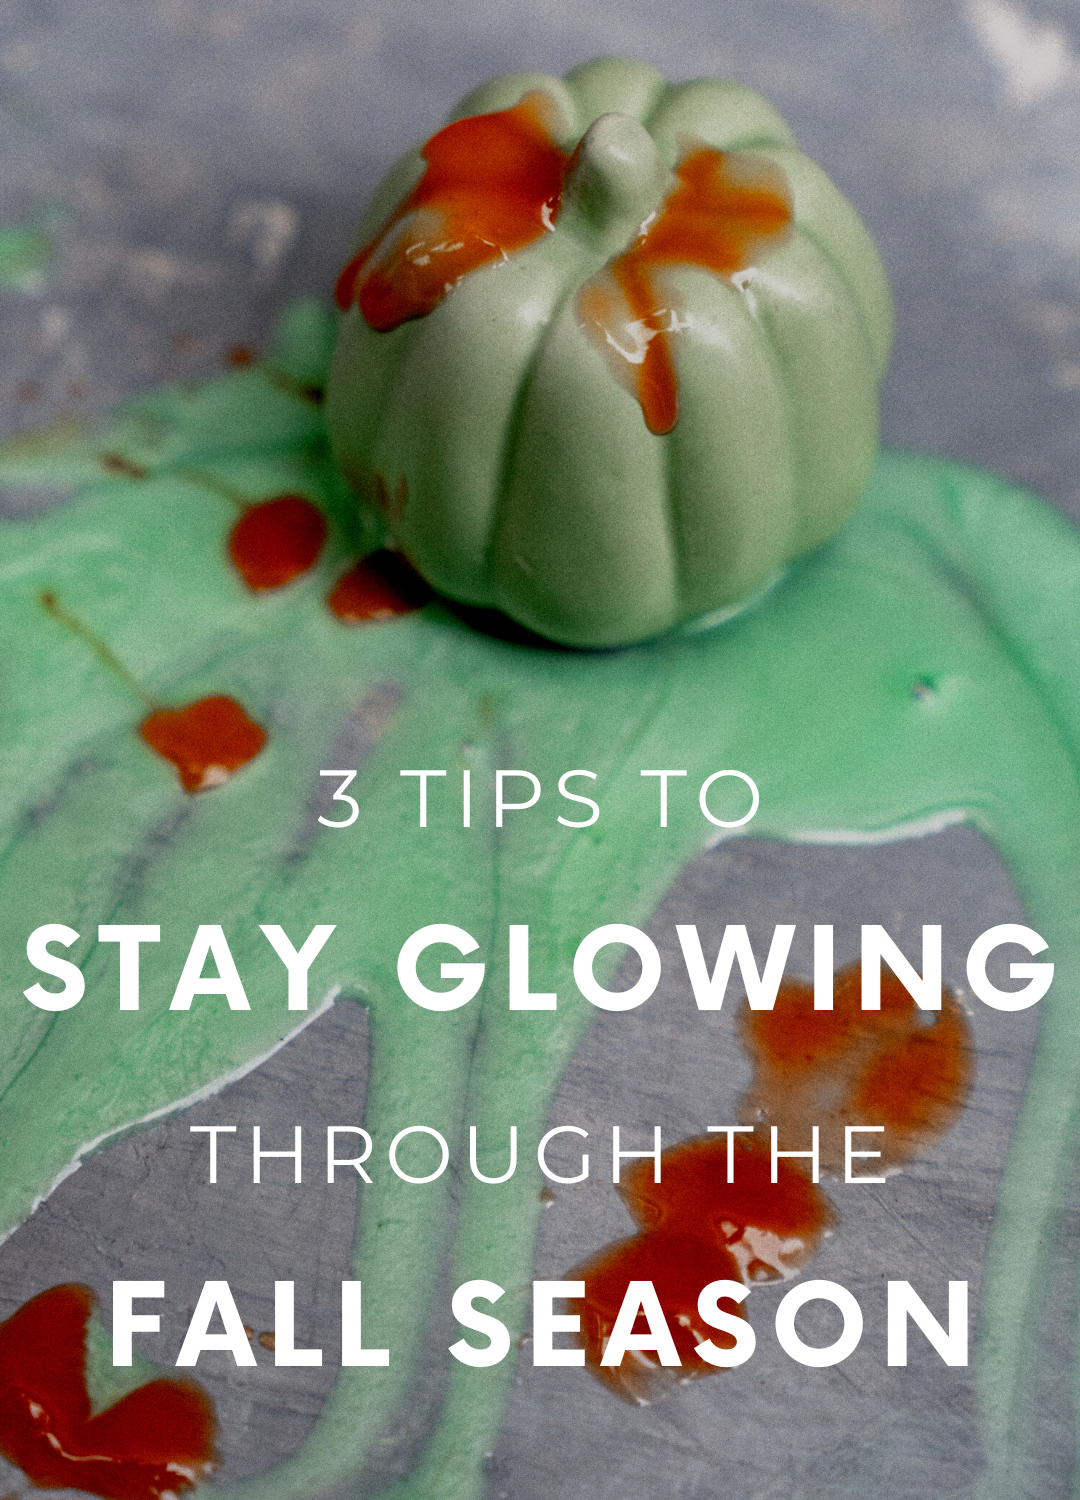 3 Tips to Stay Glowing Through the Fall Season